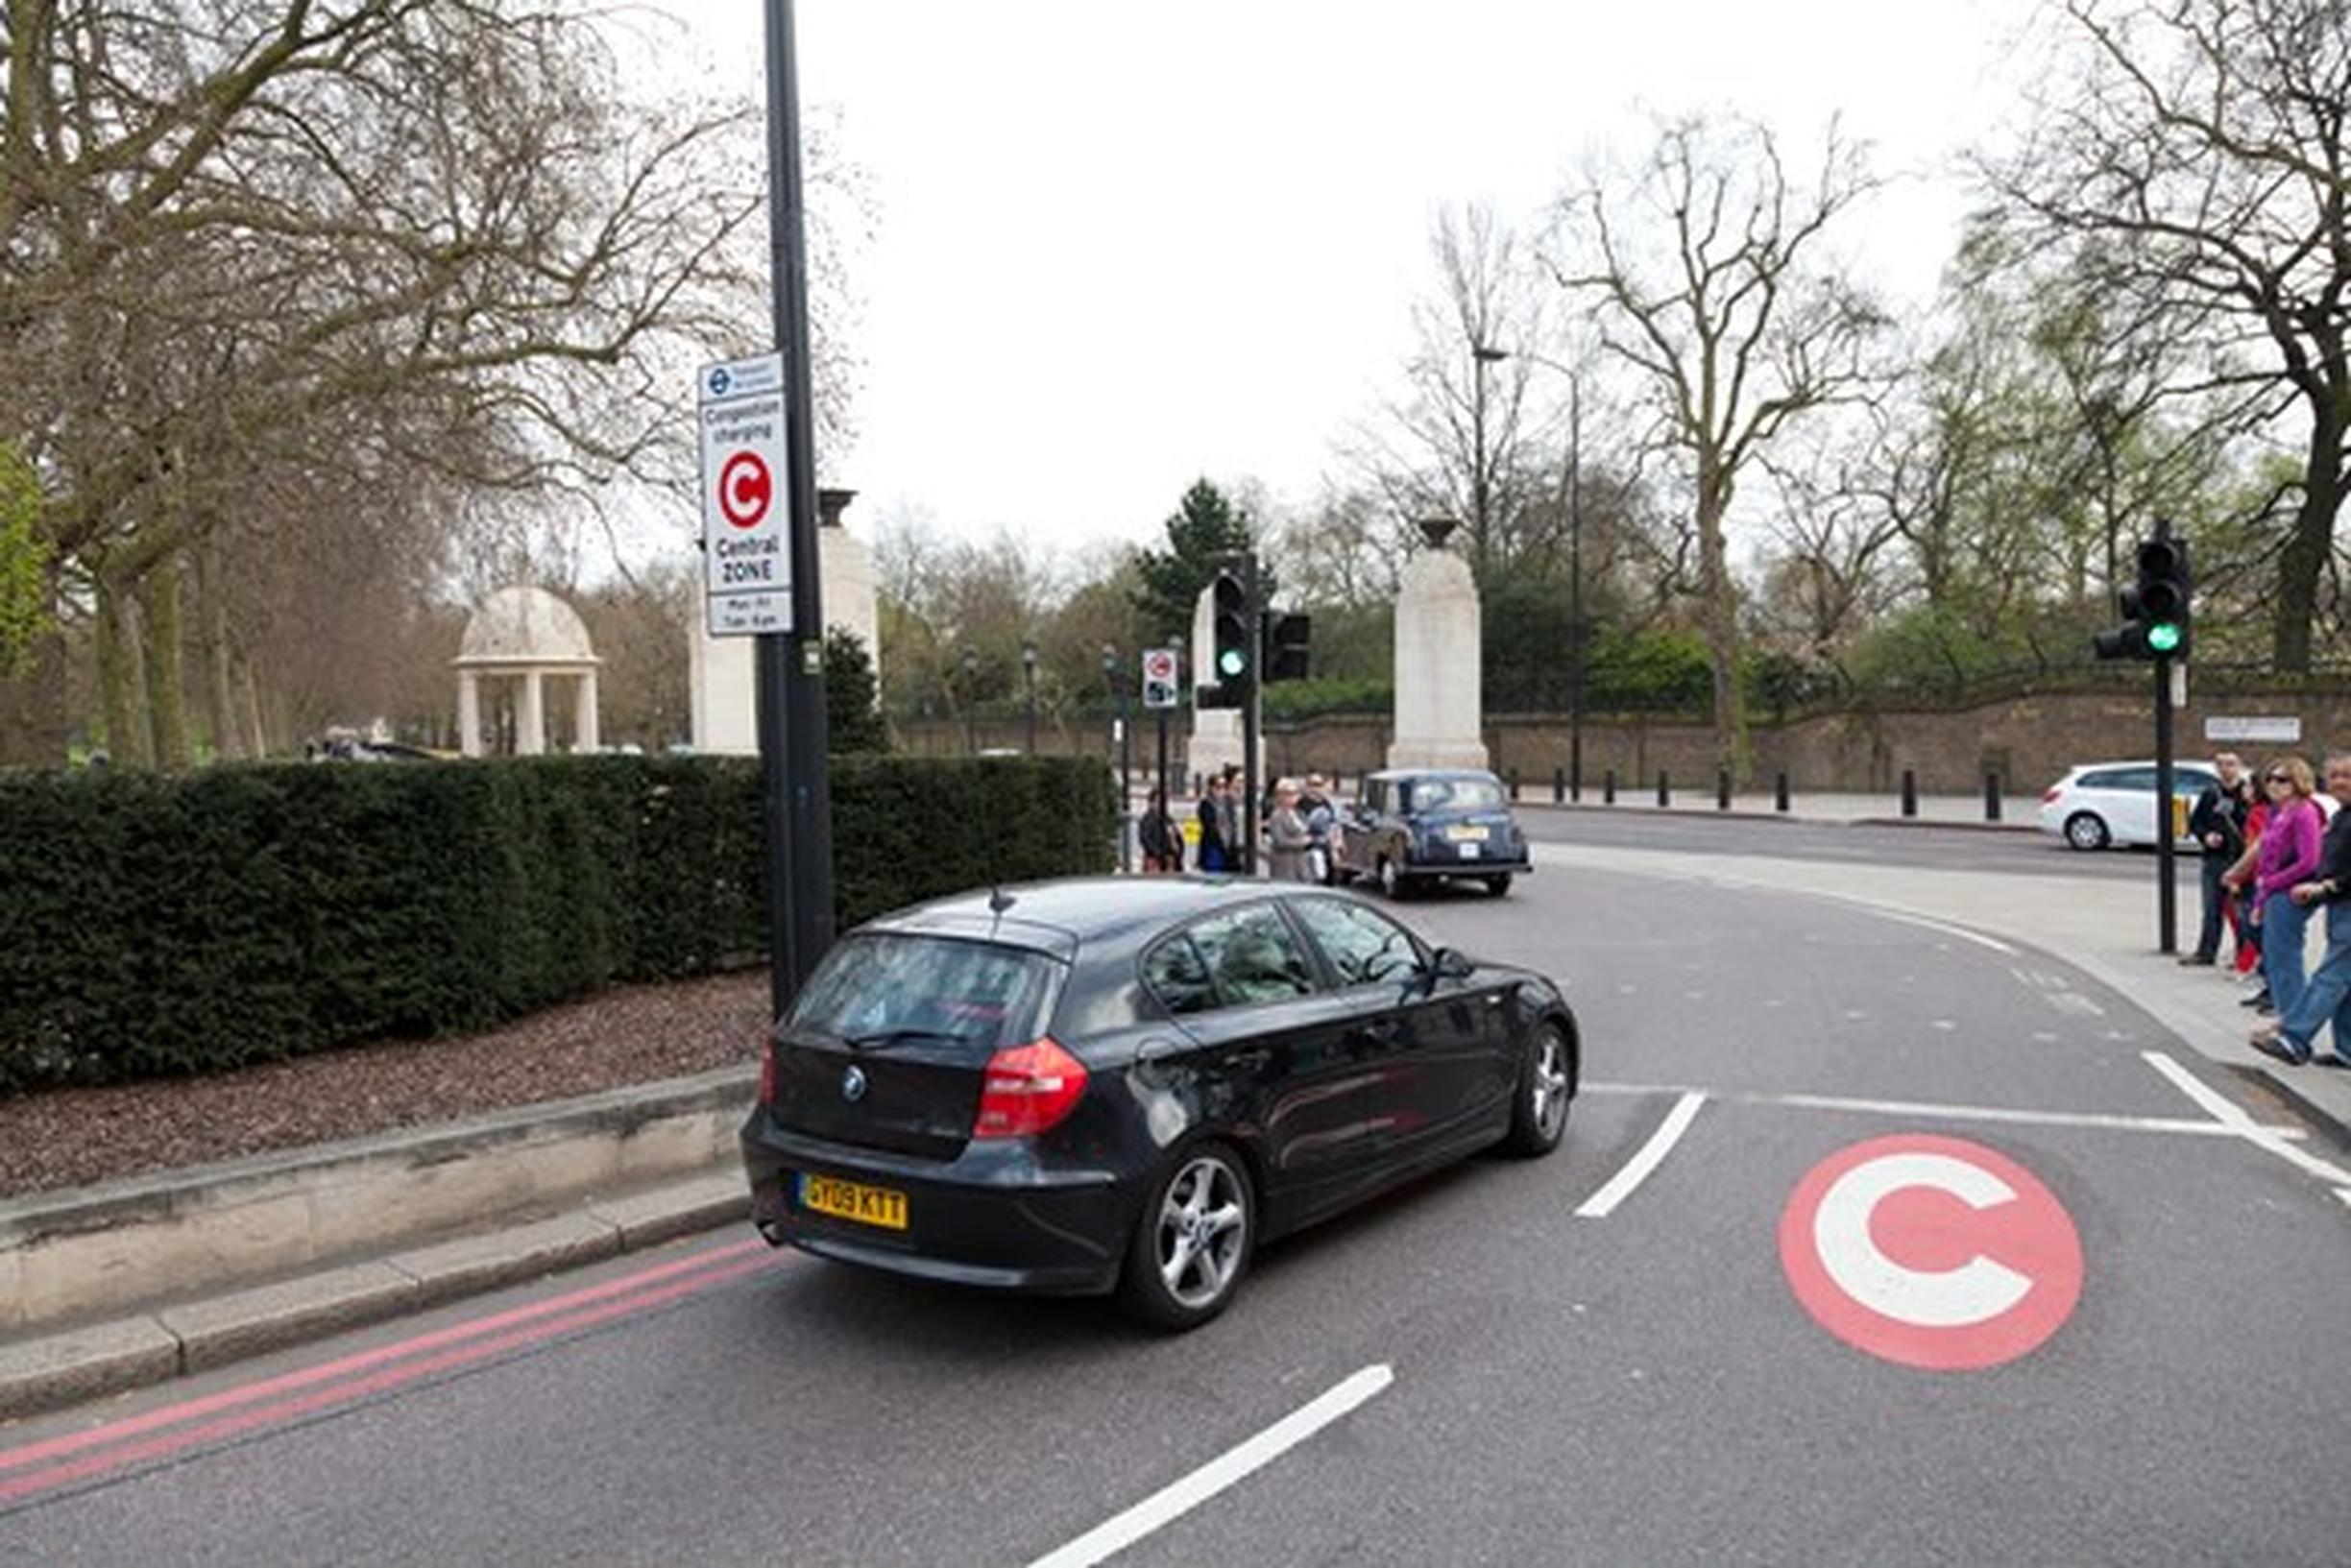 The Congestion Charge now stands at £15 a day